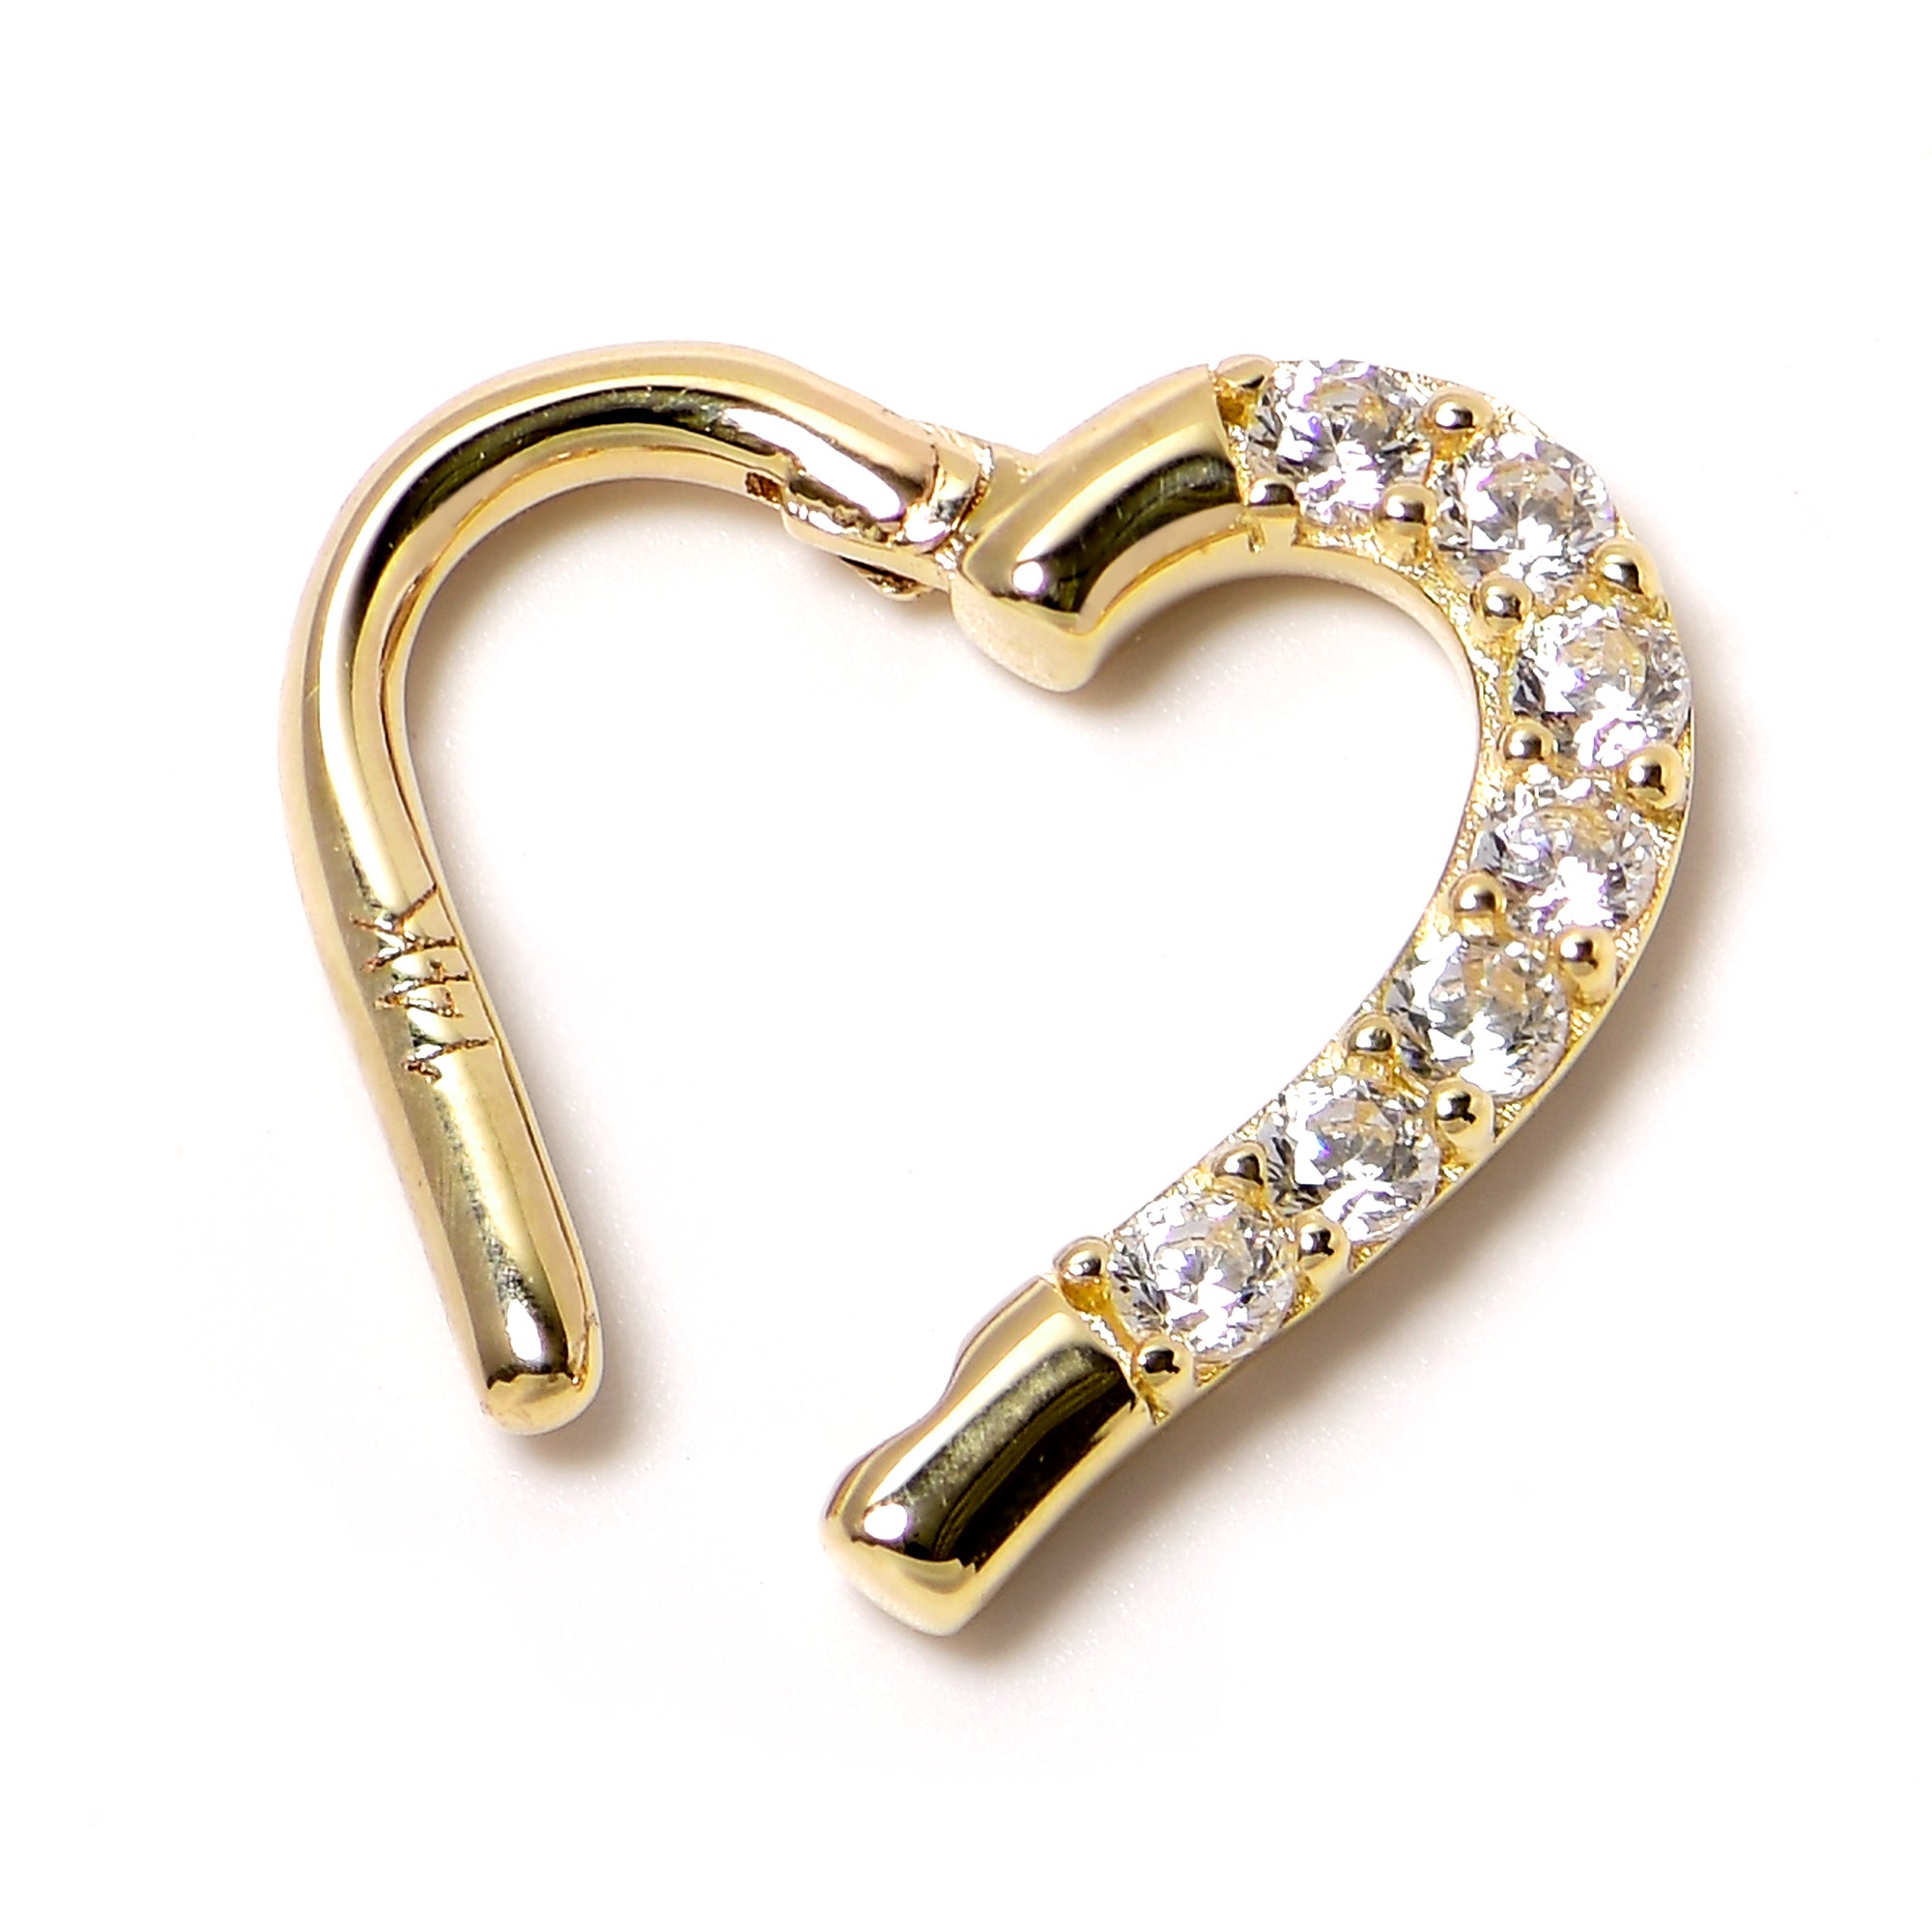 16 Gauge 5/16 14k Yellow Gold CZ Paved Ultra Luxe Left Hinged Heart Segment Ring